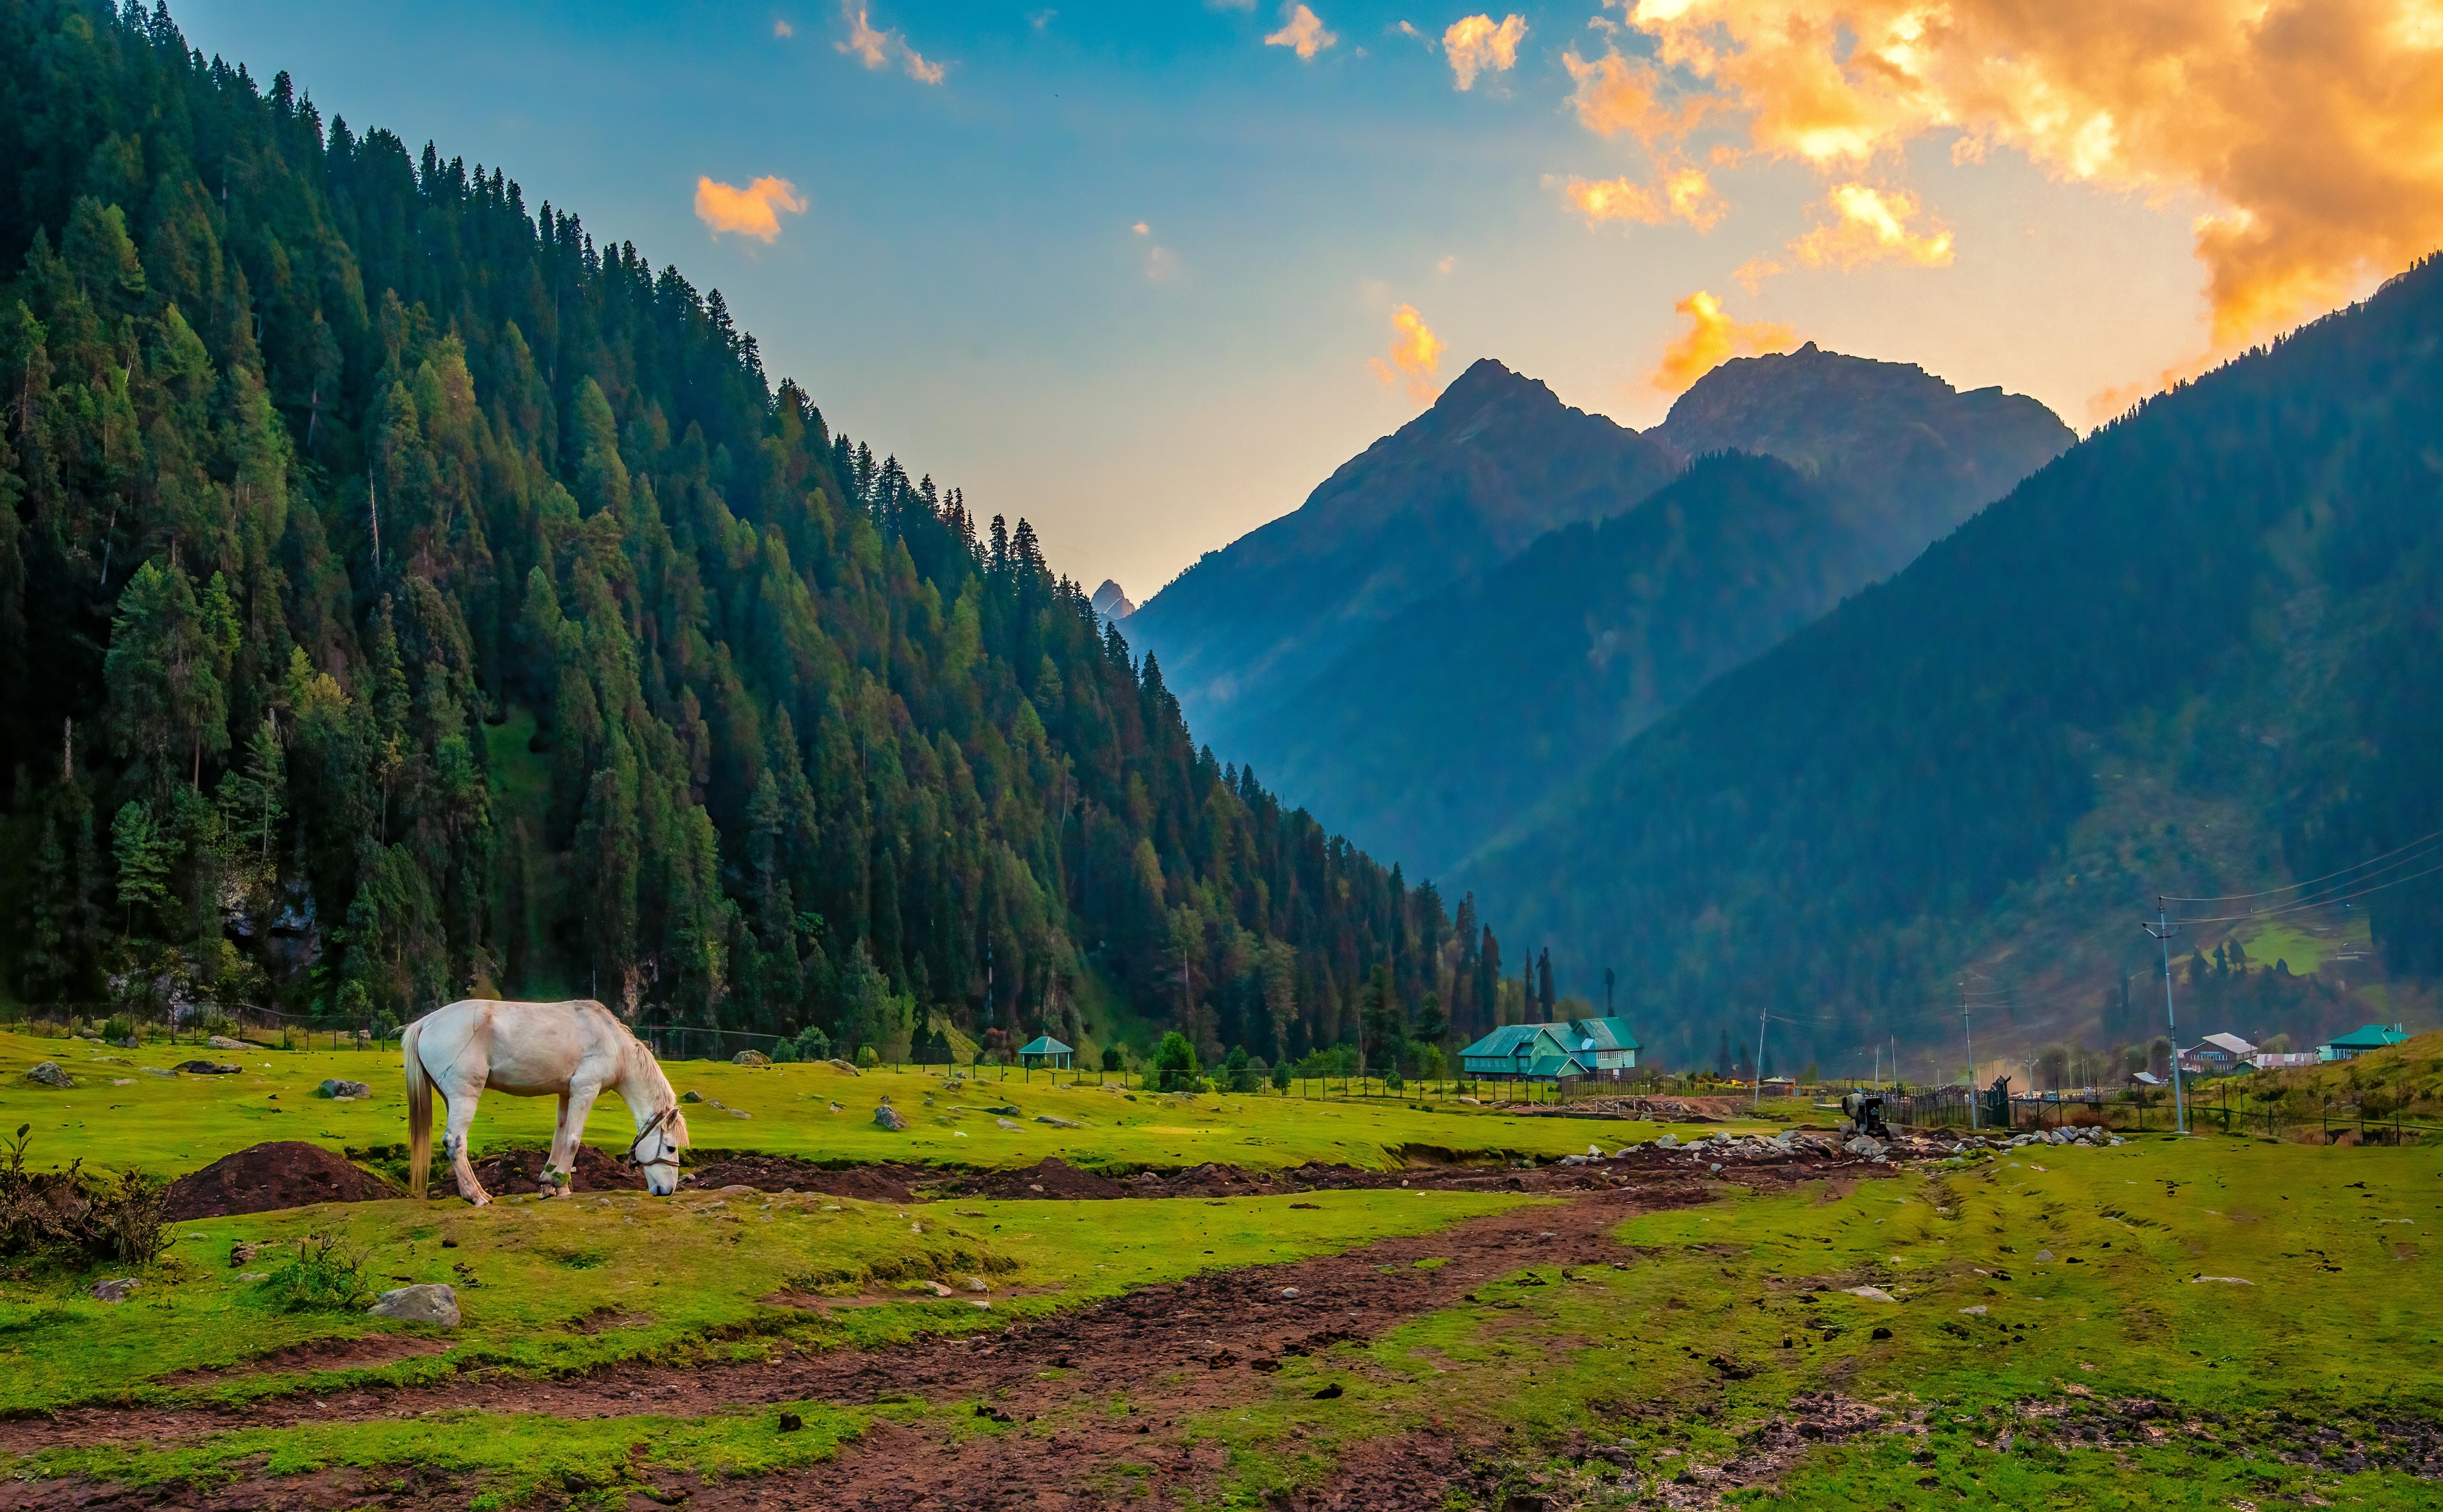 View of Kashmir's Aru Valley at sunset